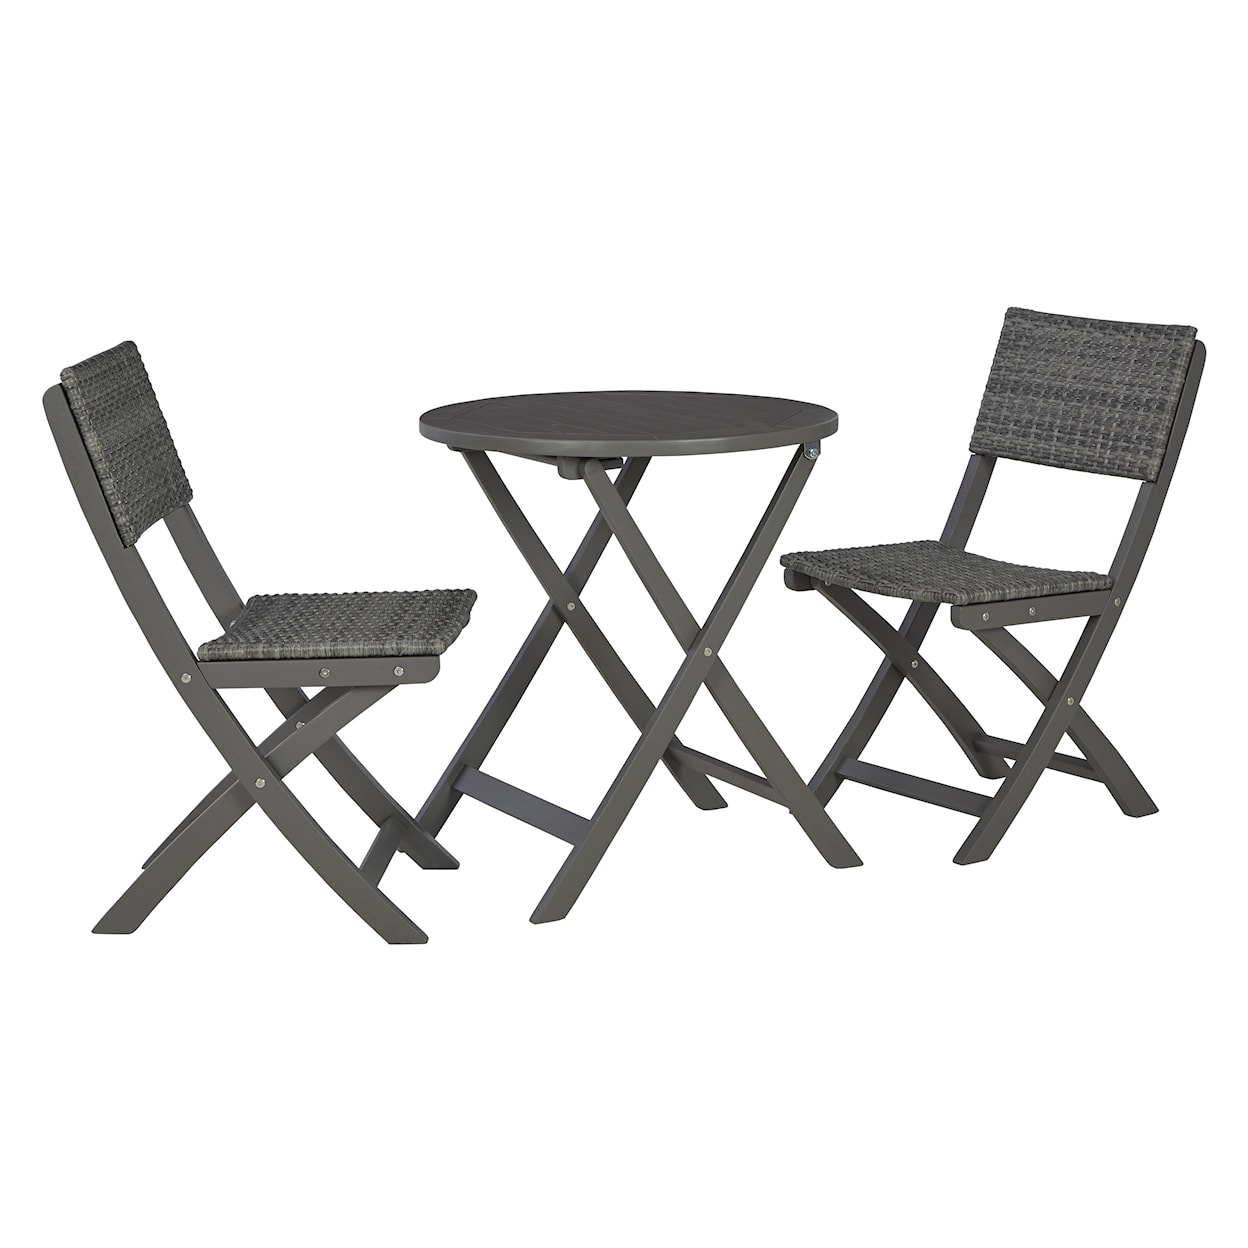 Signature Design by Ashley Safari Peak Outdoor Table and Chairs (Set of 3)